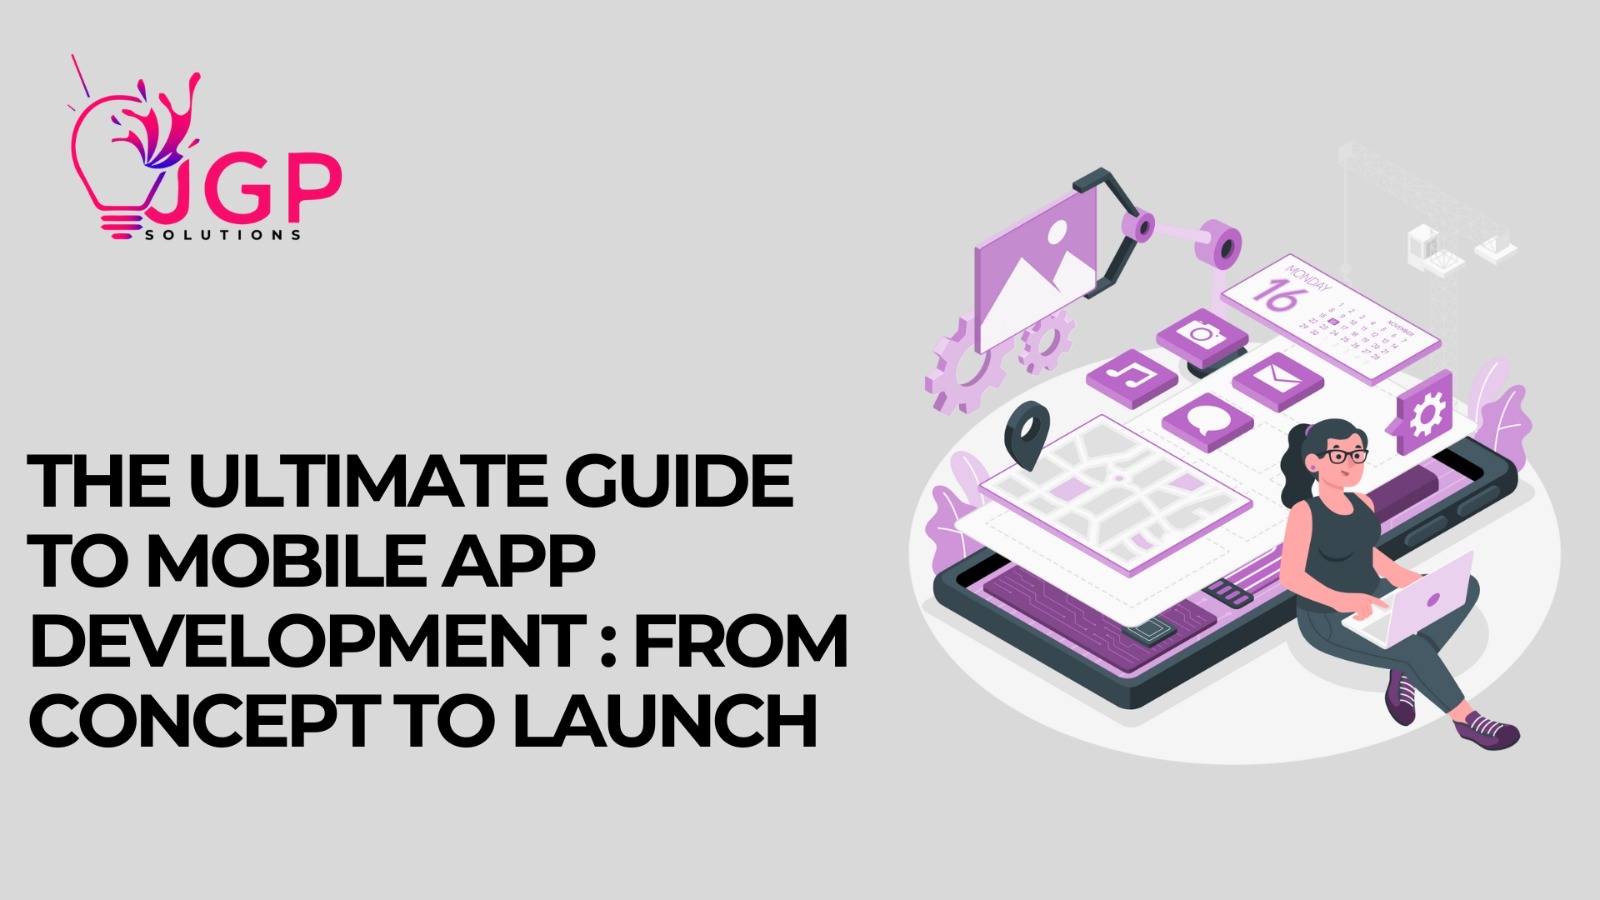 The Ultimate Guide to Mobile App Development: From Concept to Launch